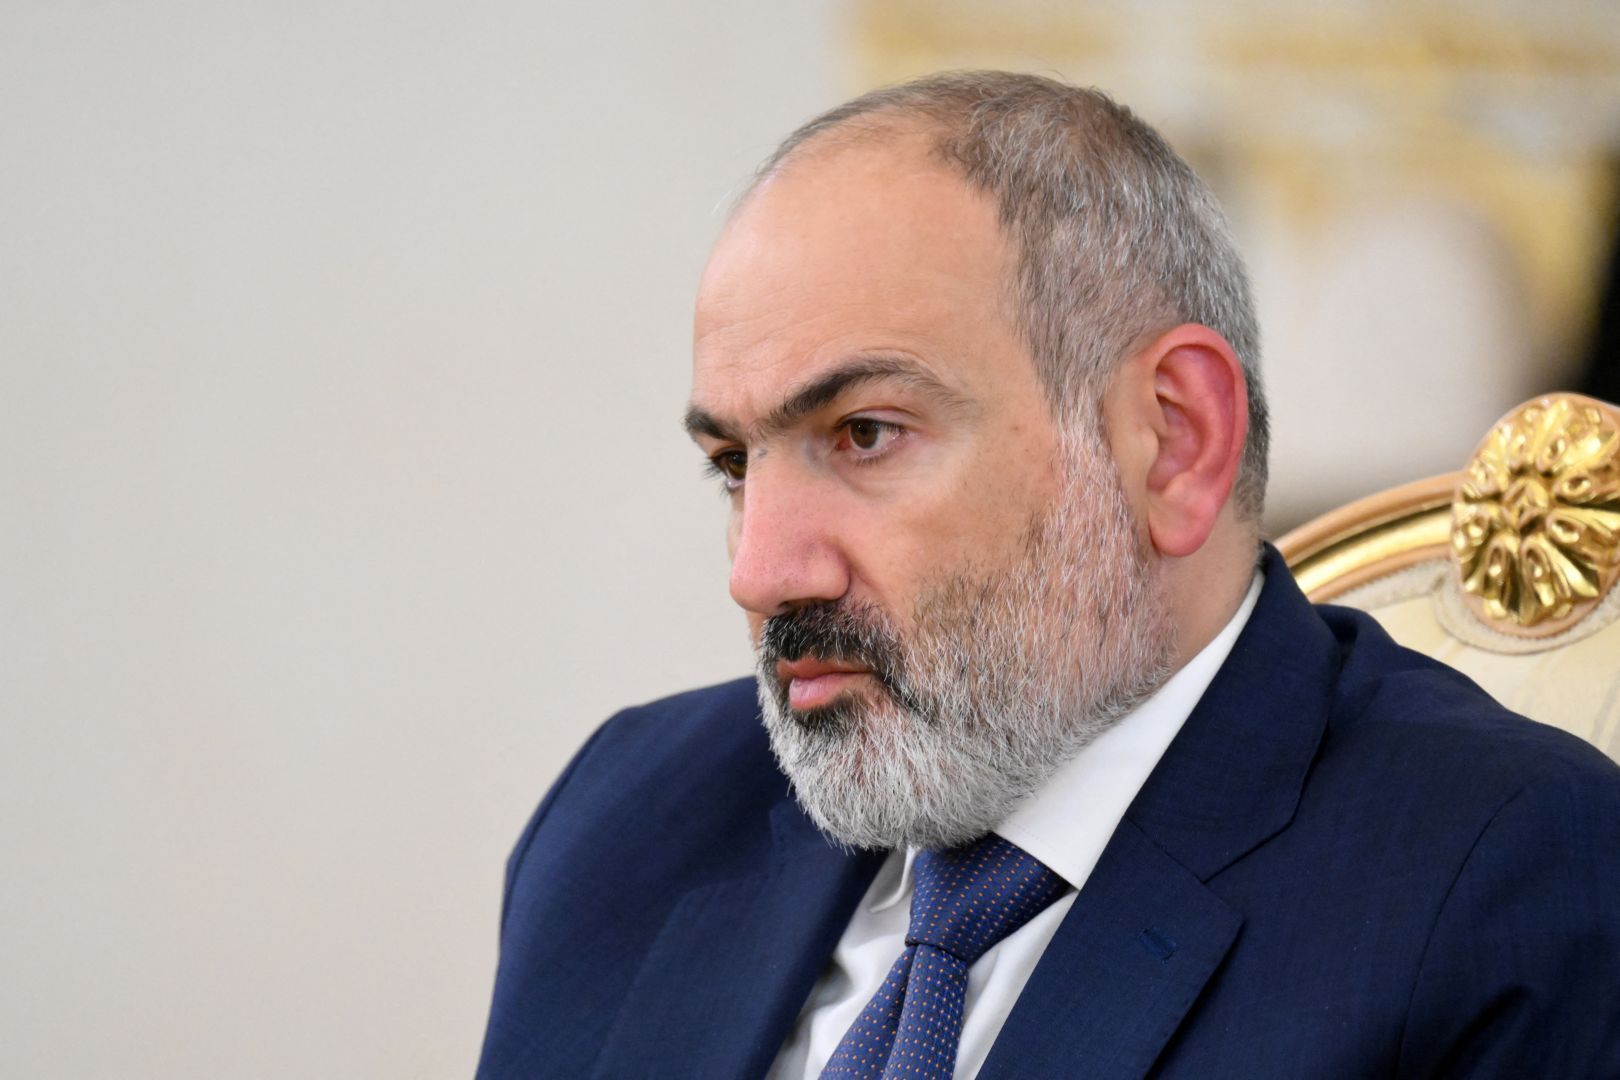 Playing with facts, Yerevan hopes for new chaos in S Caucasus